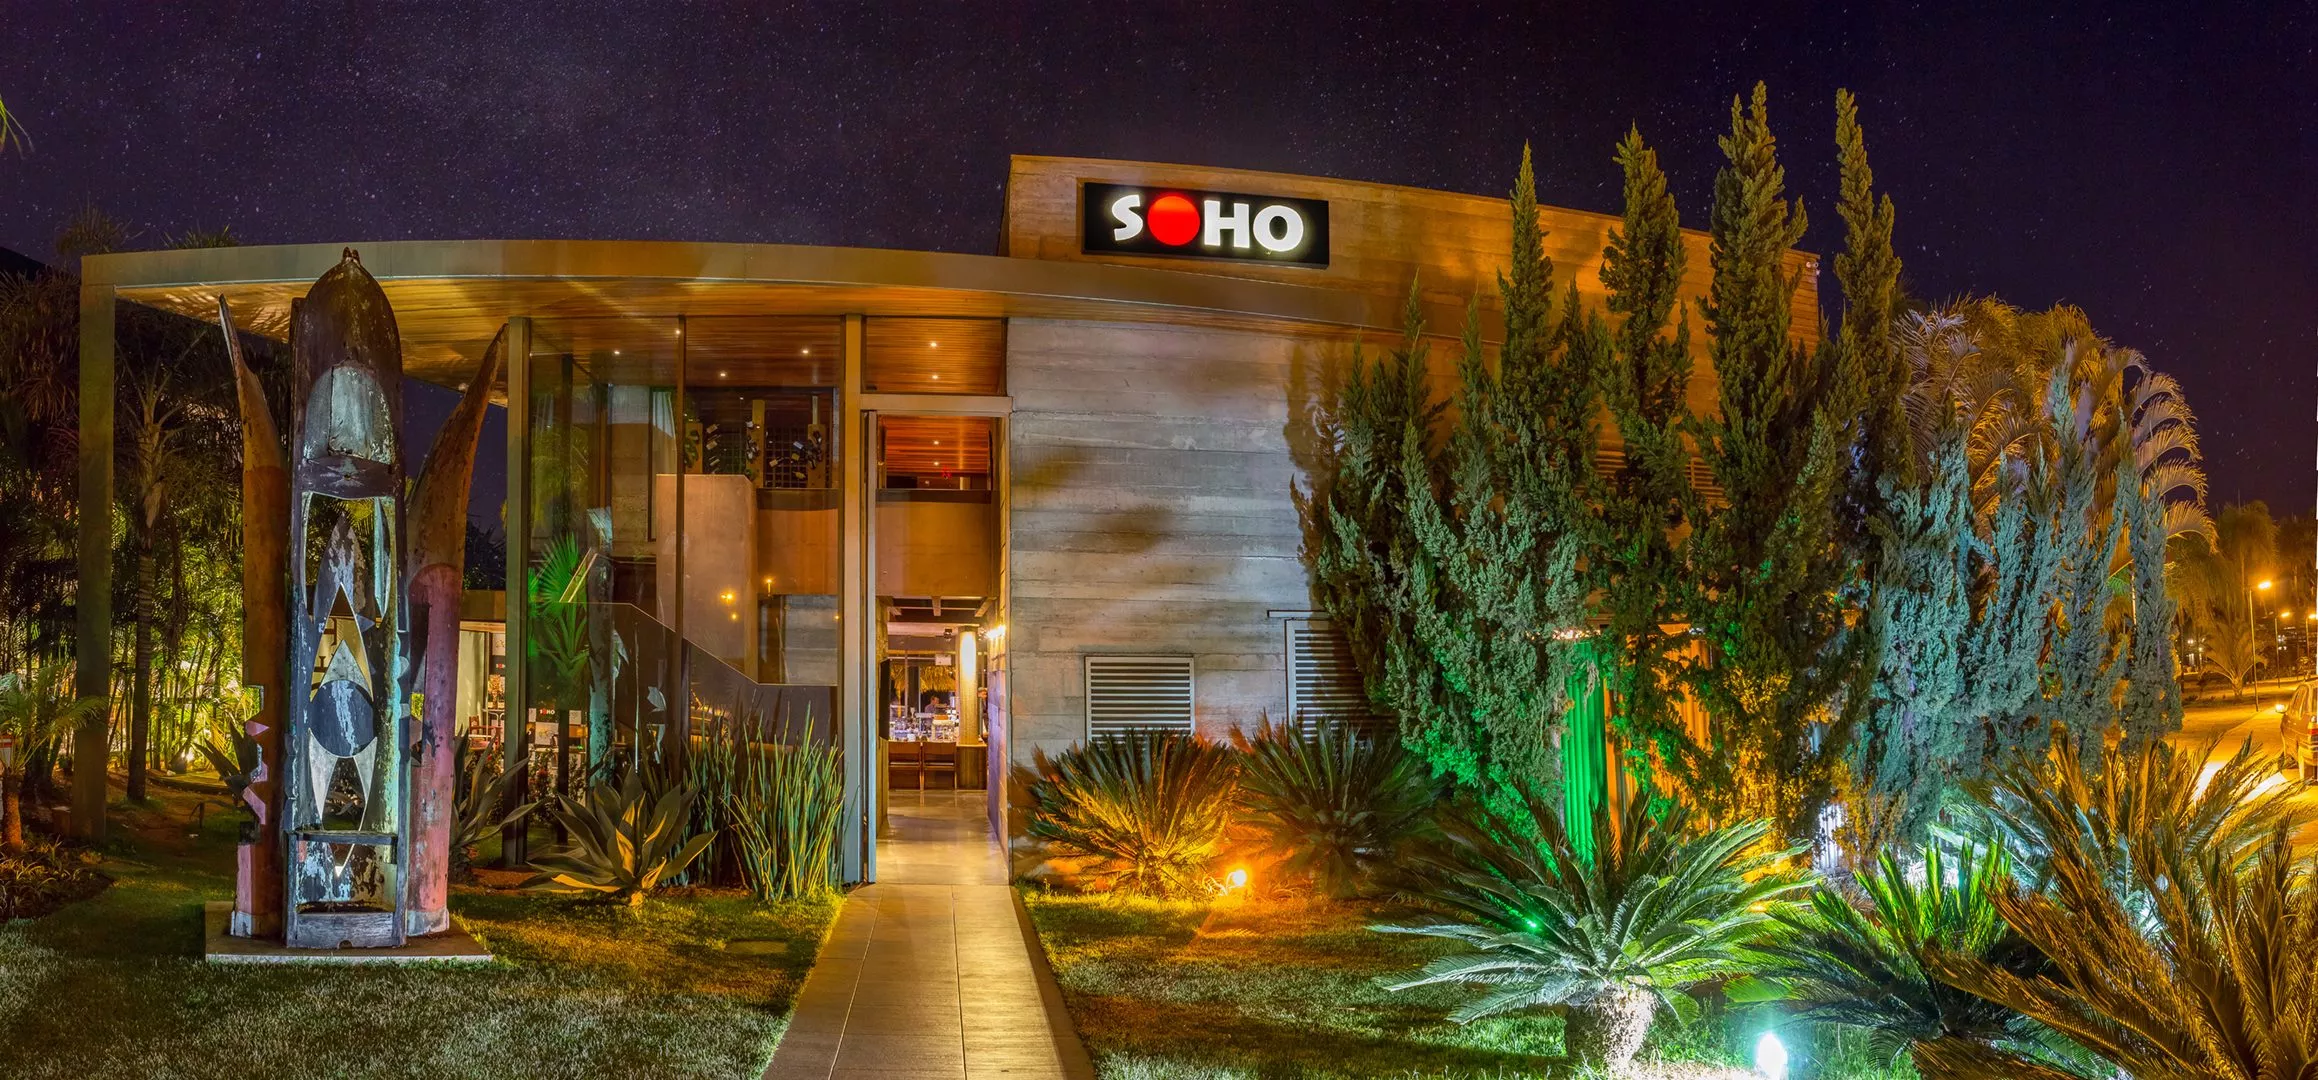 Soho Club in Brazil, South America  - Rated 0.6